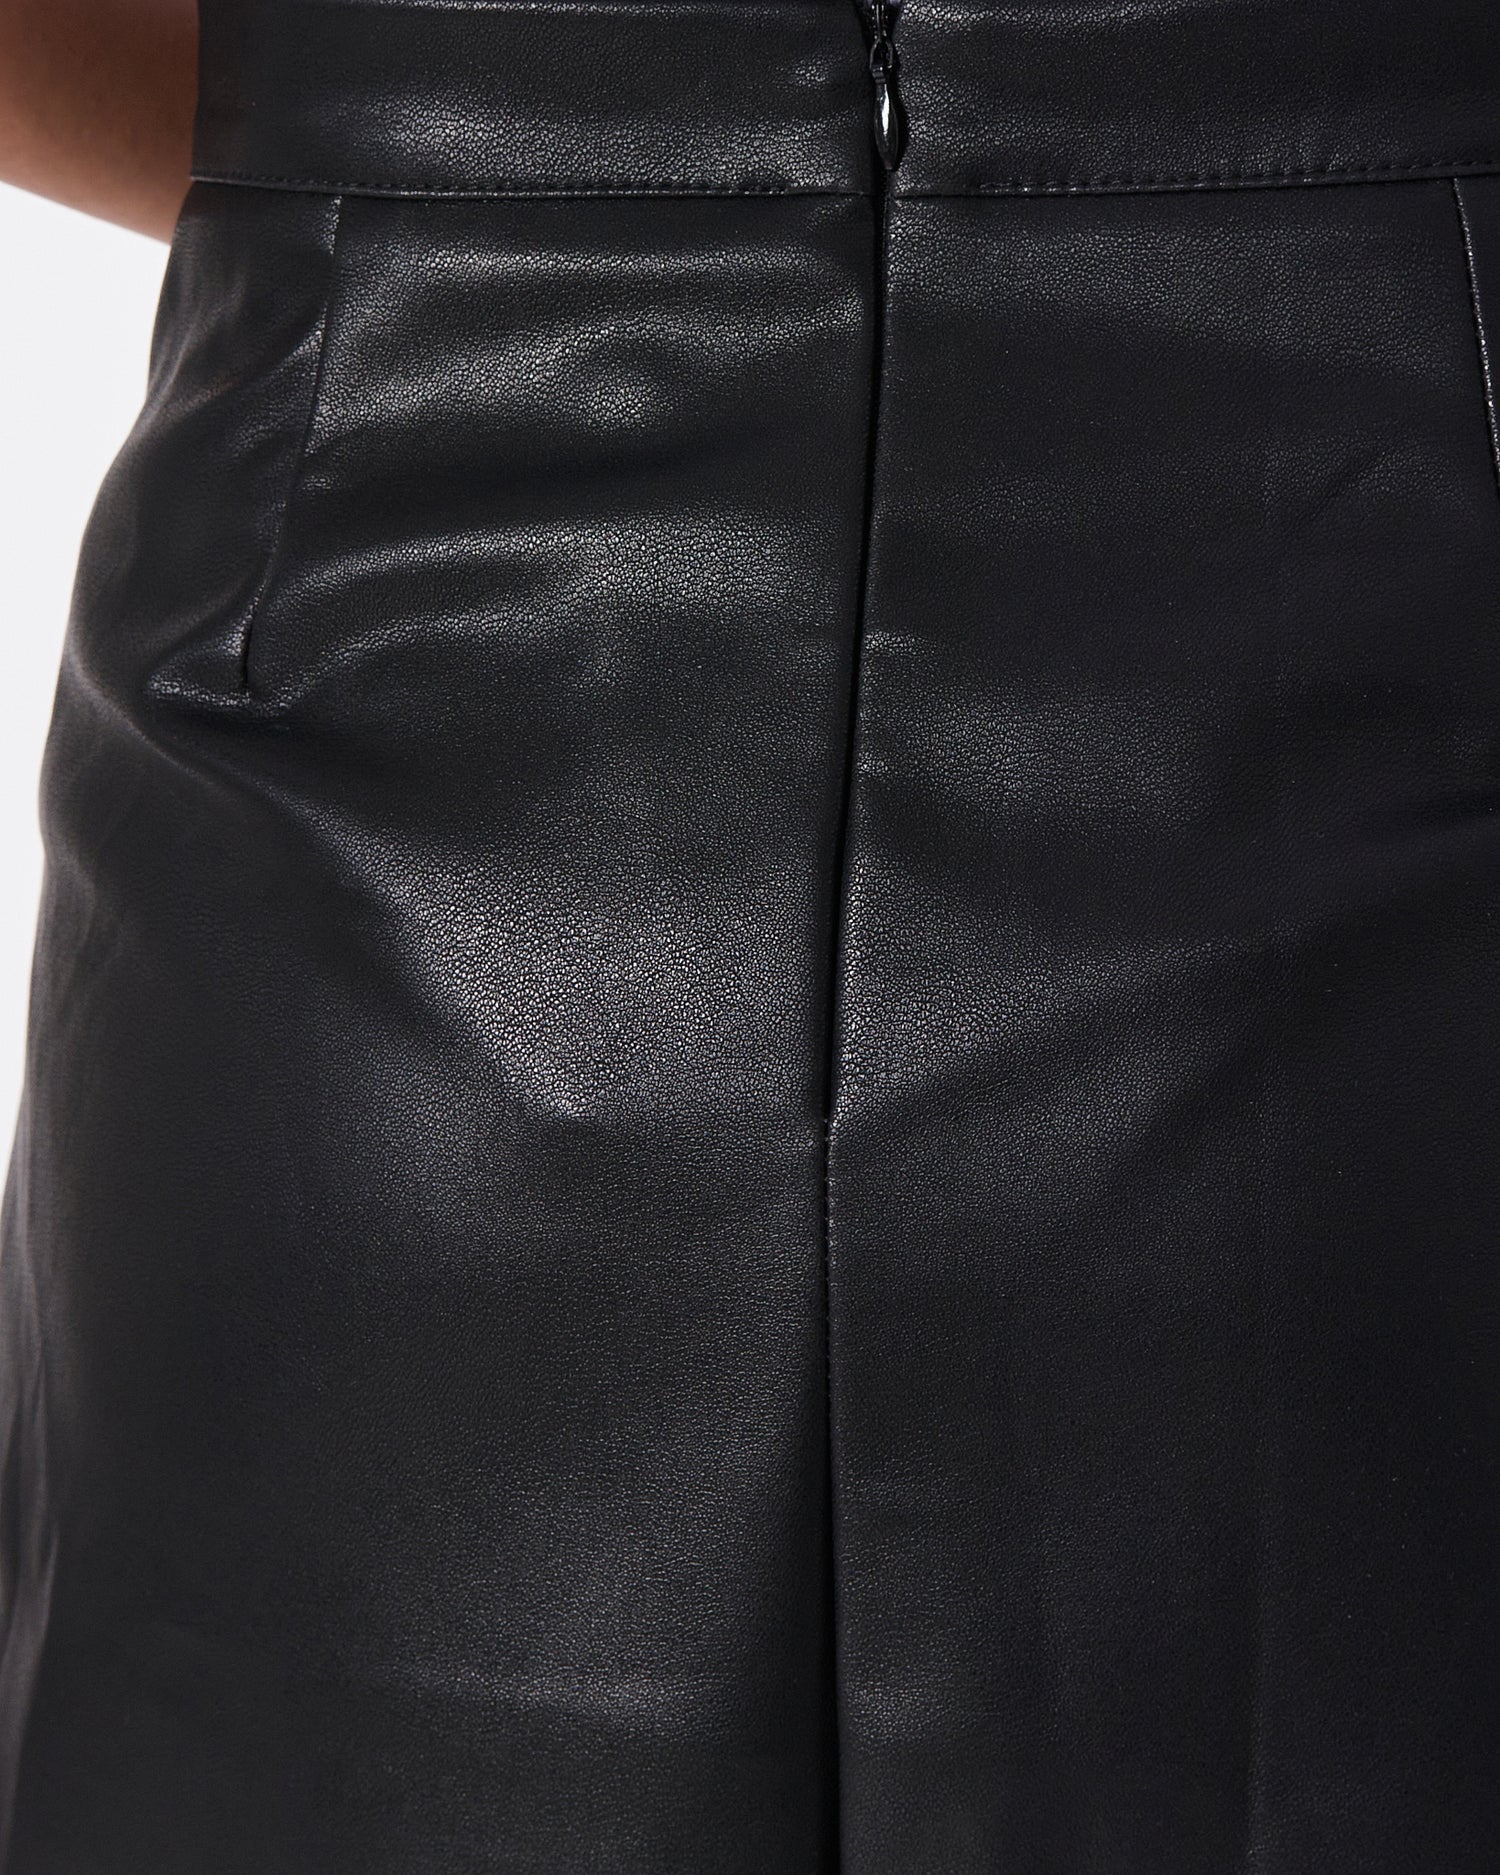 Leather Lady Pencil Skirt